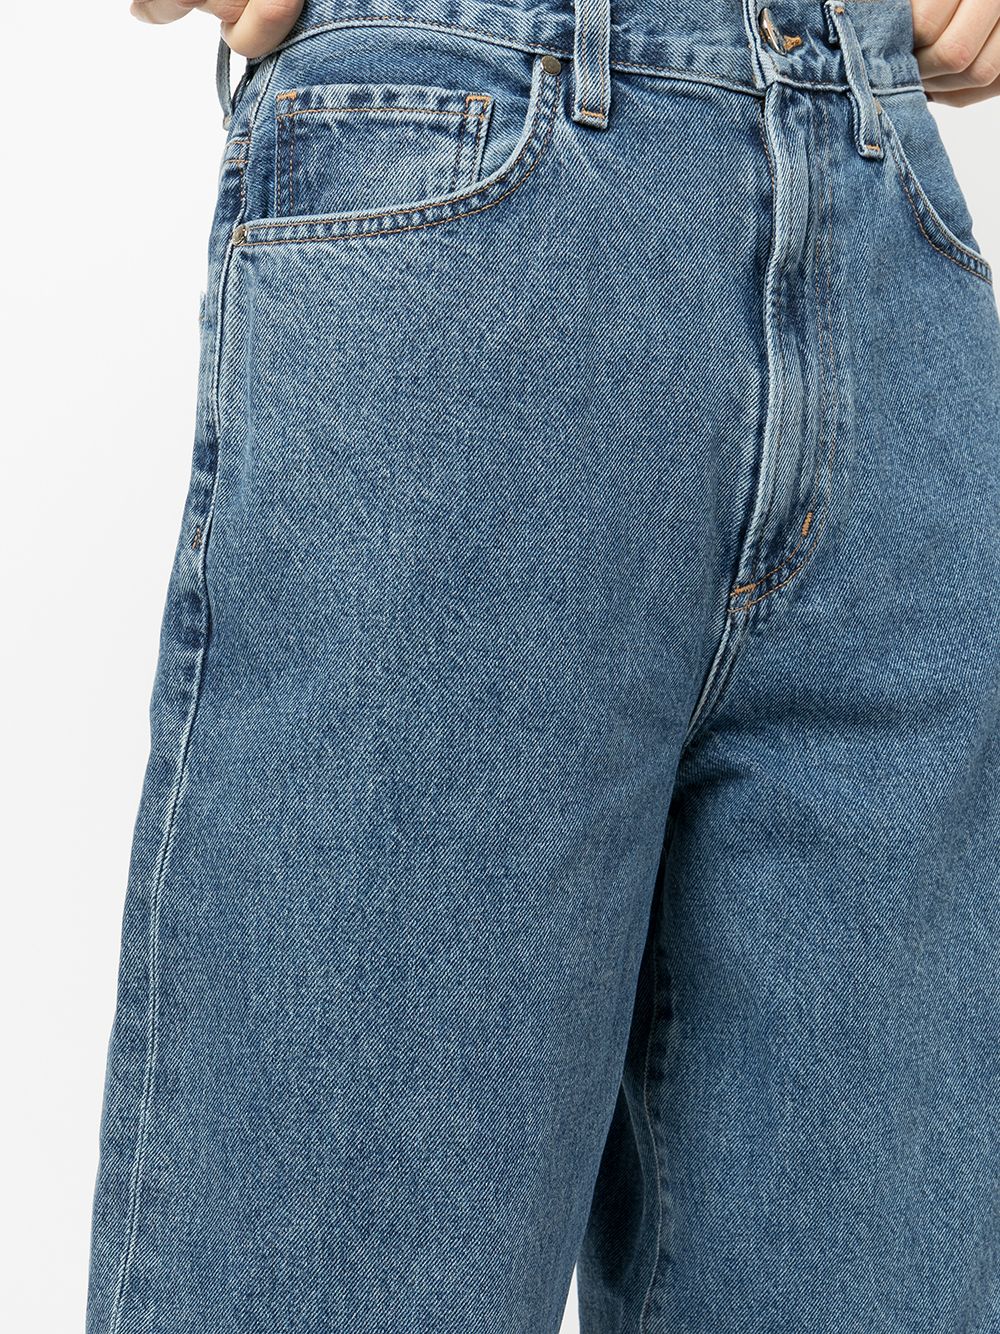 GOLDSIGN high-waisted Tapered Jeans - Farfetch